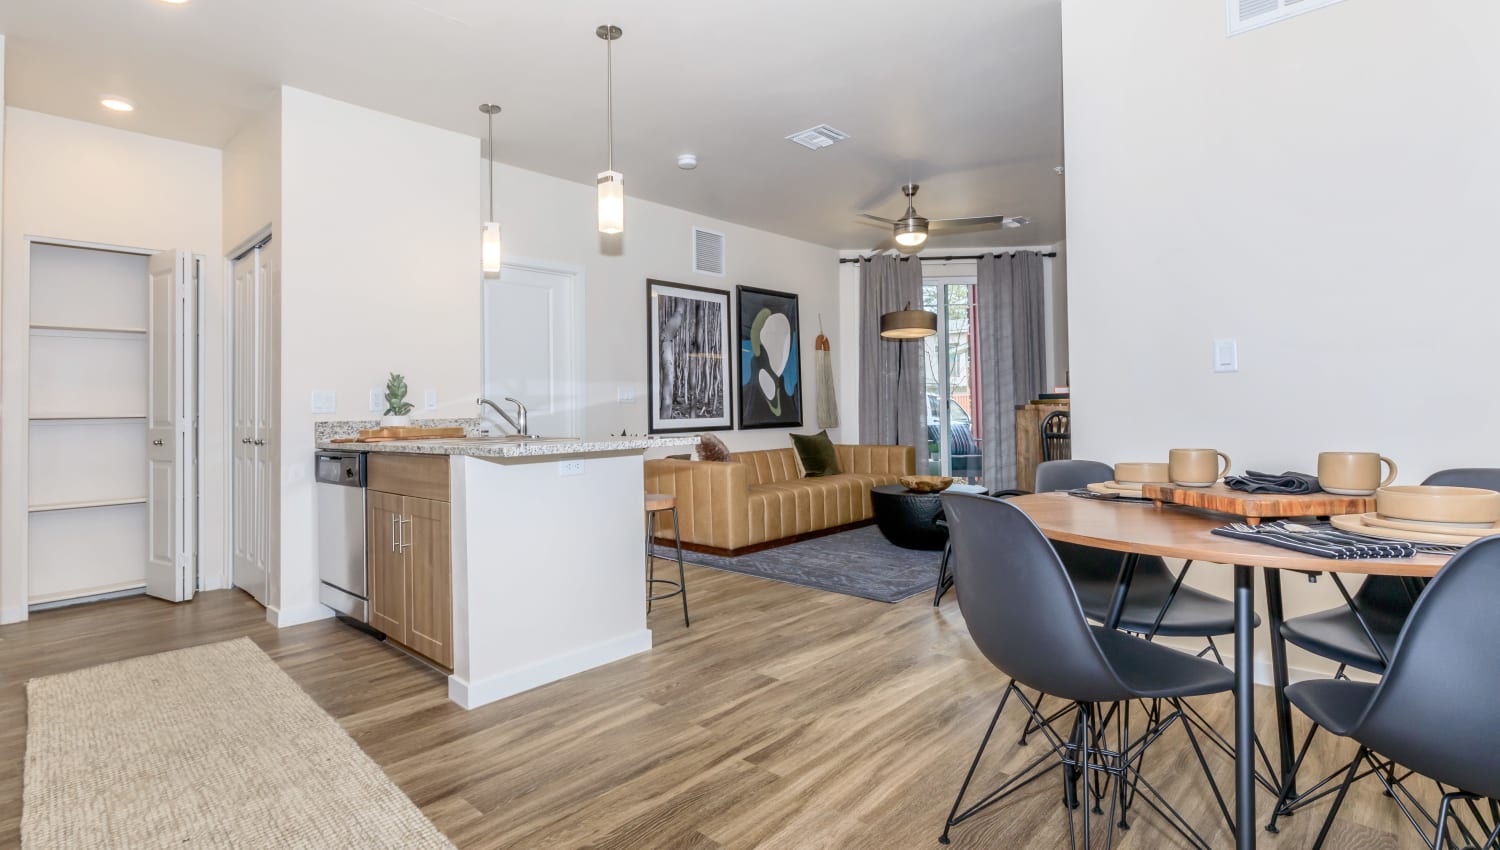 Apartment with wood-style flooring at Trailside Apartments in Flagstaff, Arizona